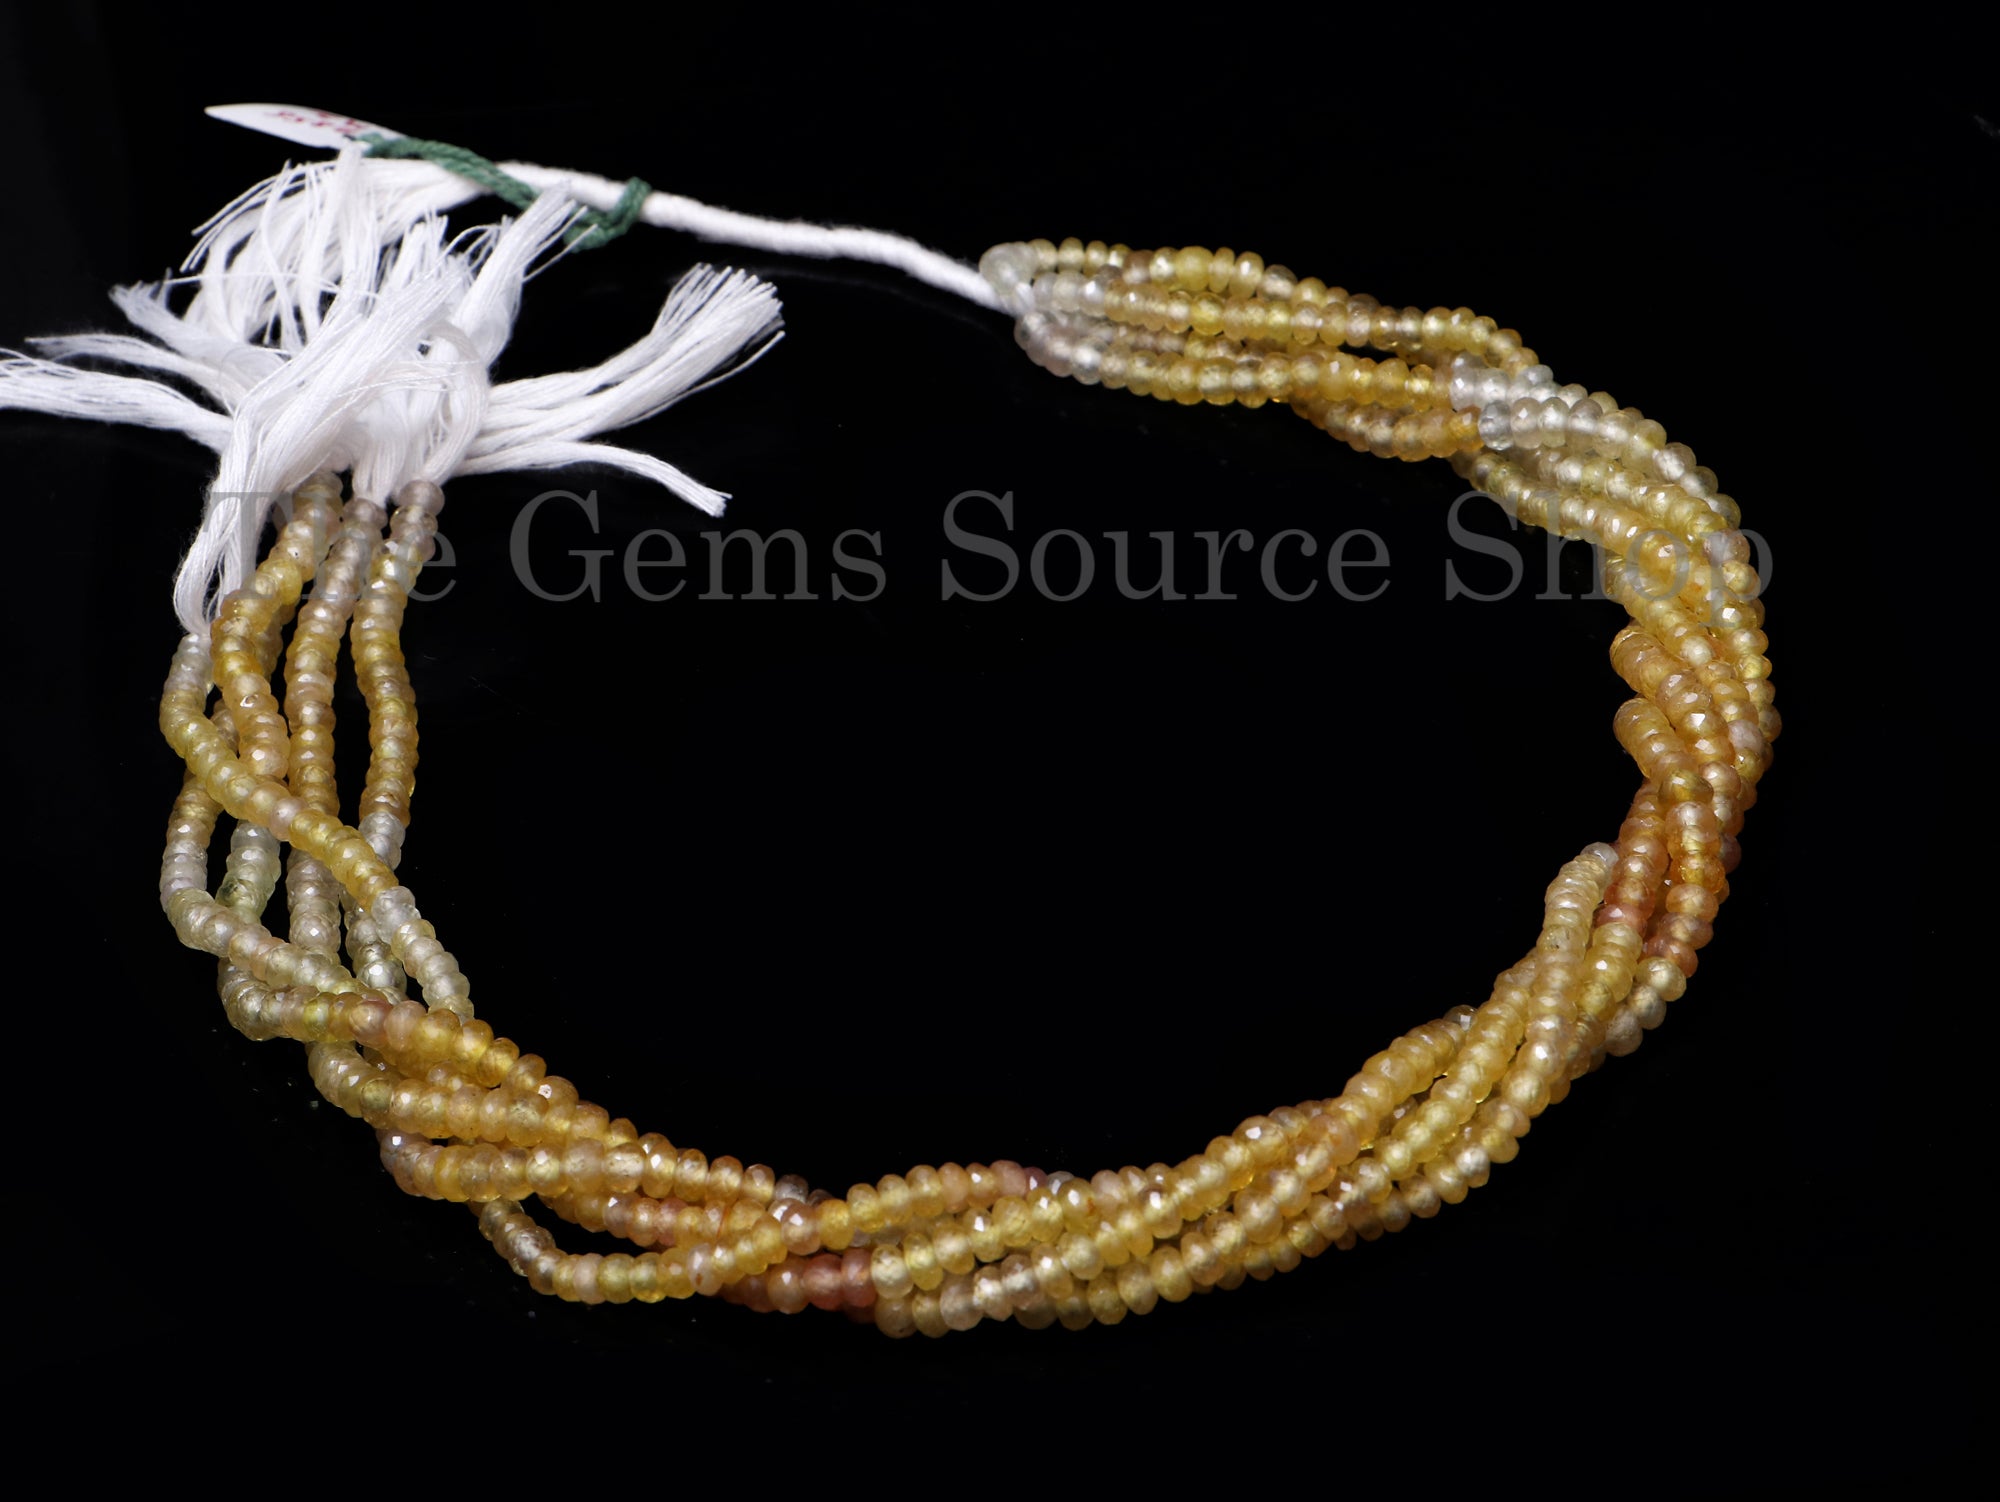 Yellow Sapphire Beads, Sapphire Faceted Beads, Sapphire Rondelle Beads, Sapphire Gemstone Beads